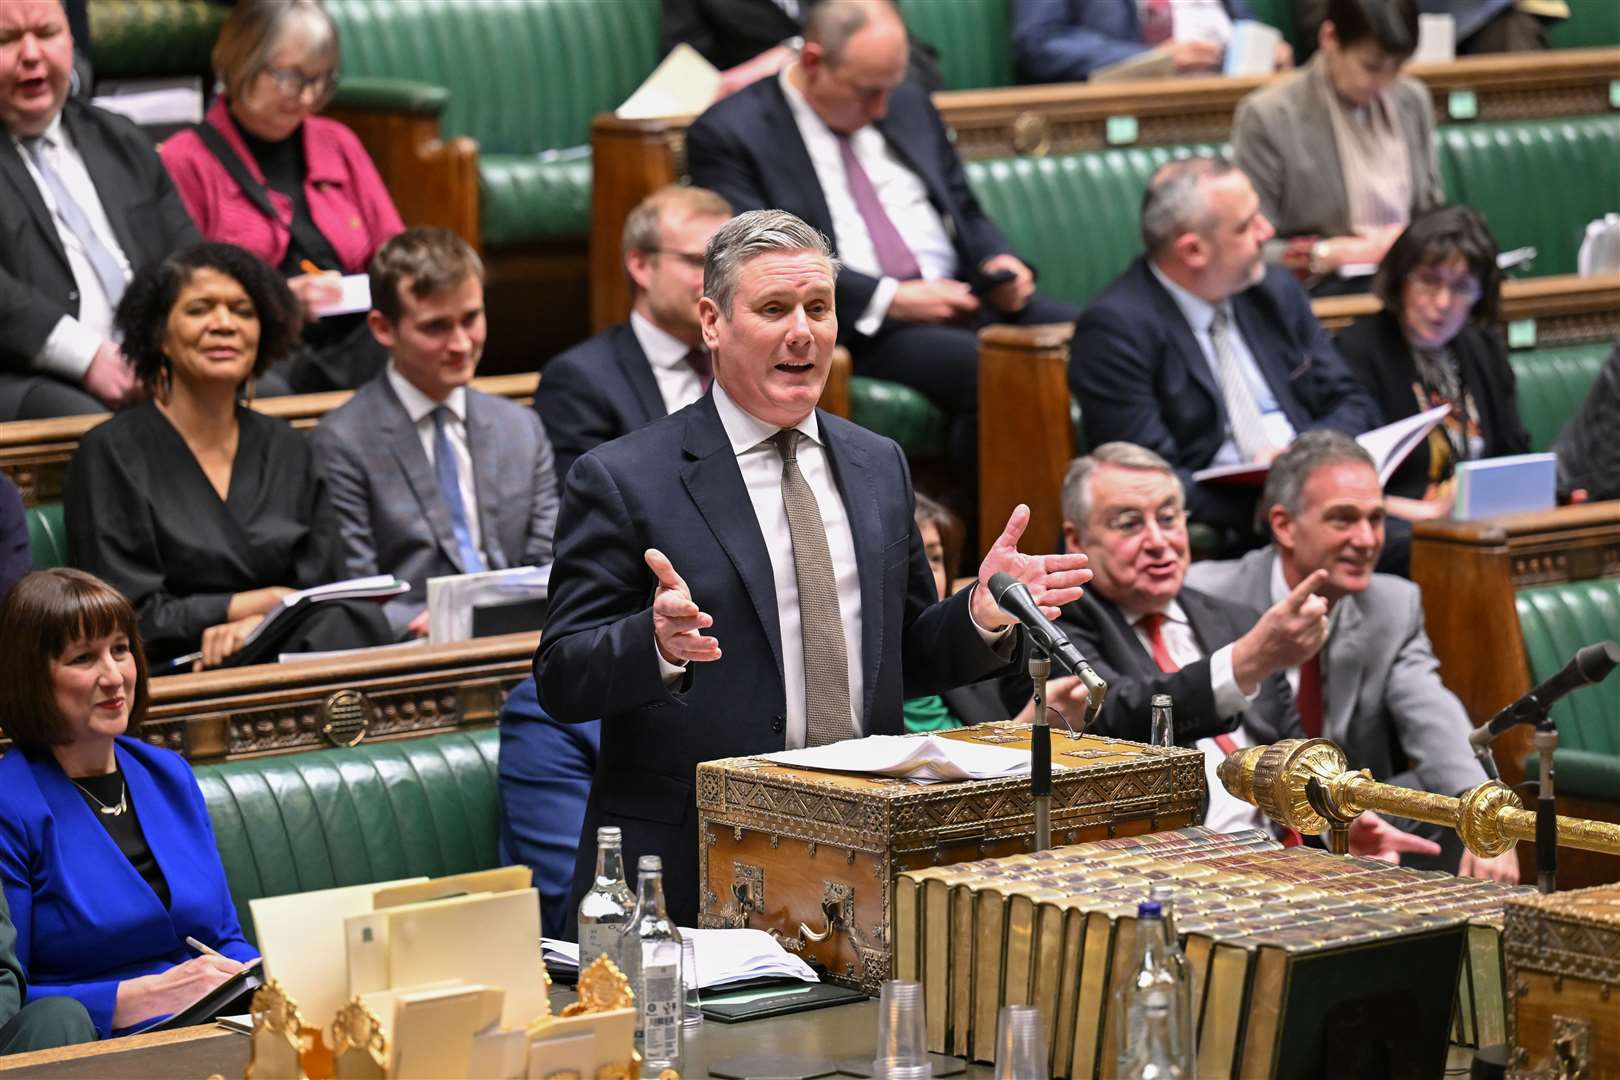 Labour leader Sir Keir Starmer speaking after Chancellor of the Exchequer Jeremy Hunt delivered his Budget (UK Parliament/Maria Unger/PA)